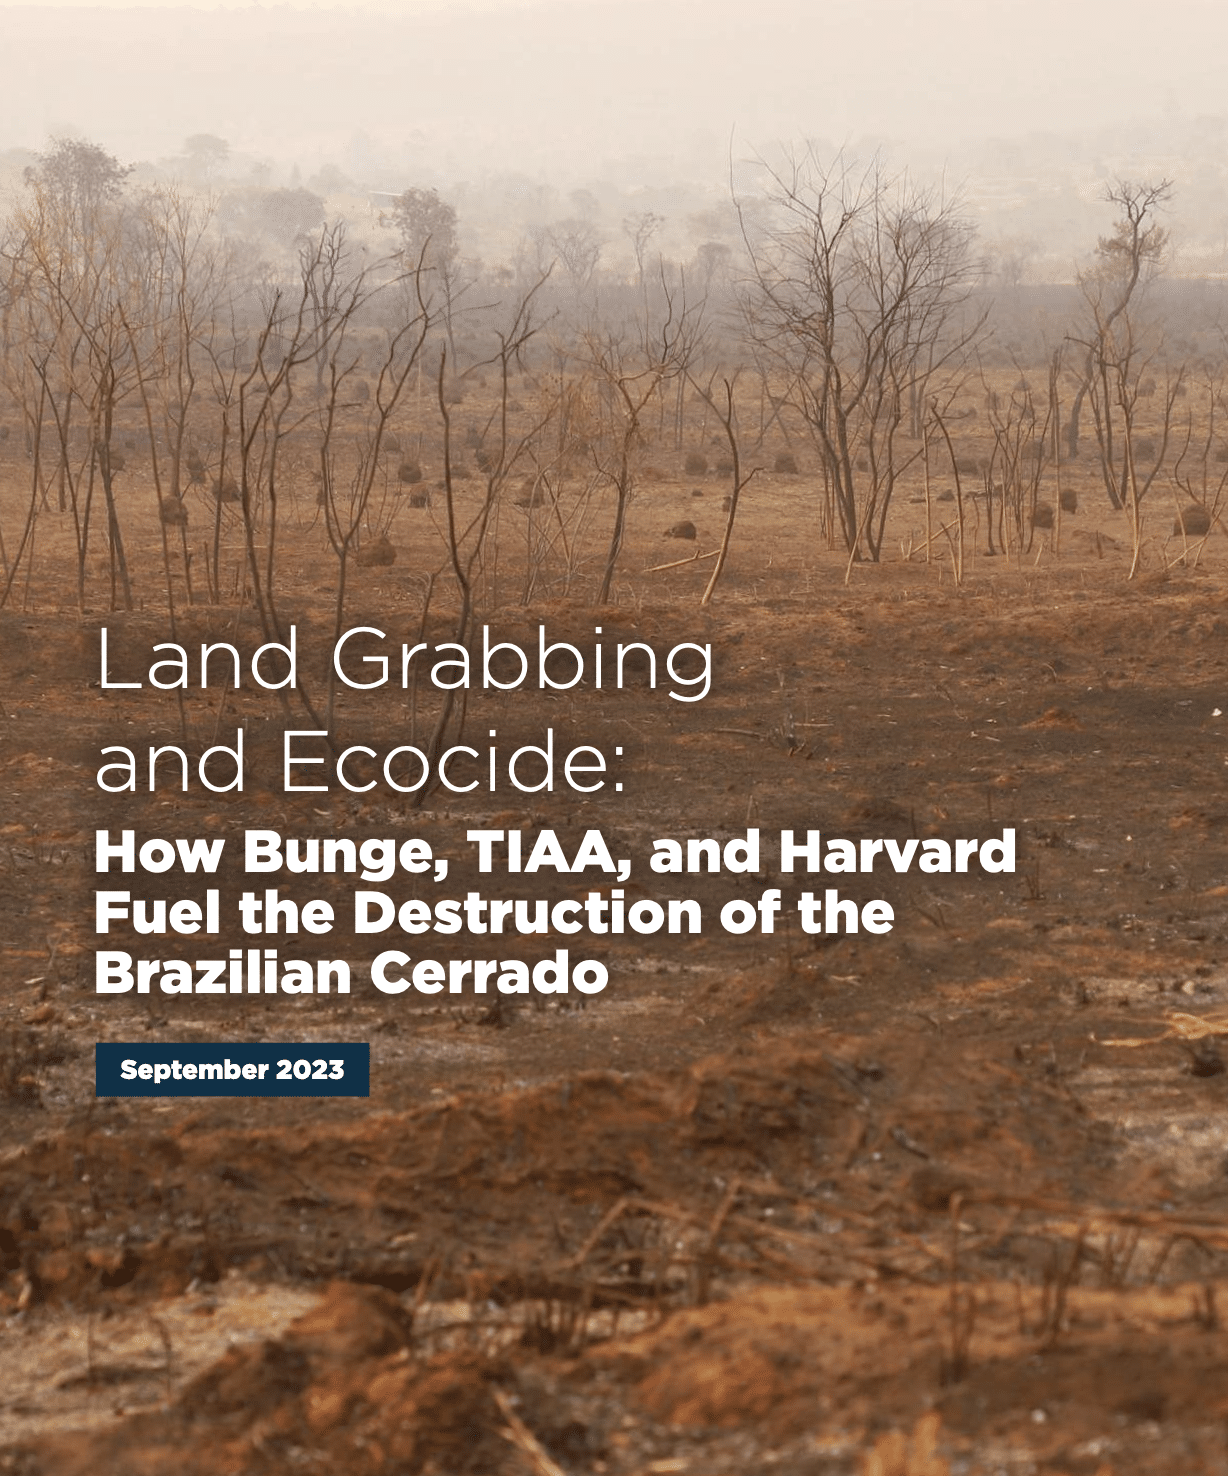 Land Grabbing and Ecocide: How Bunge, TIAA, and Harvard Fuel the Destruction of the Brazilian Cerrado